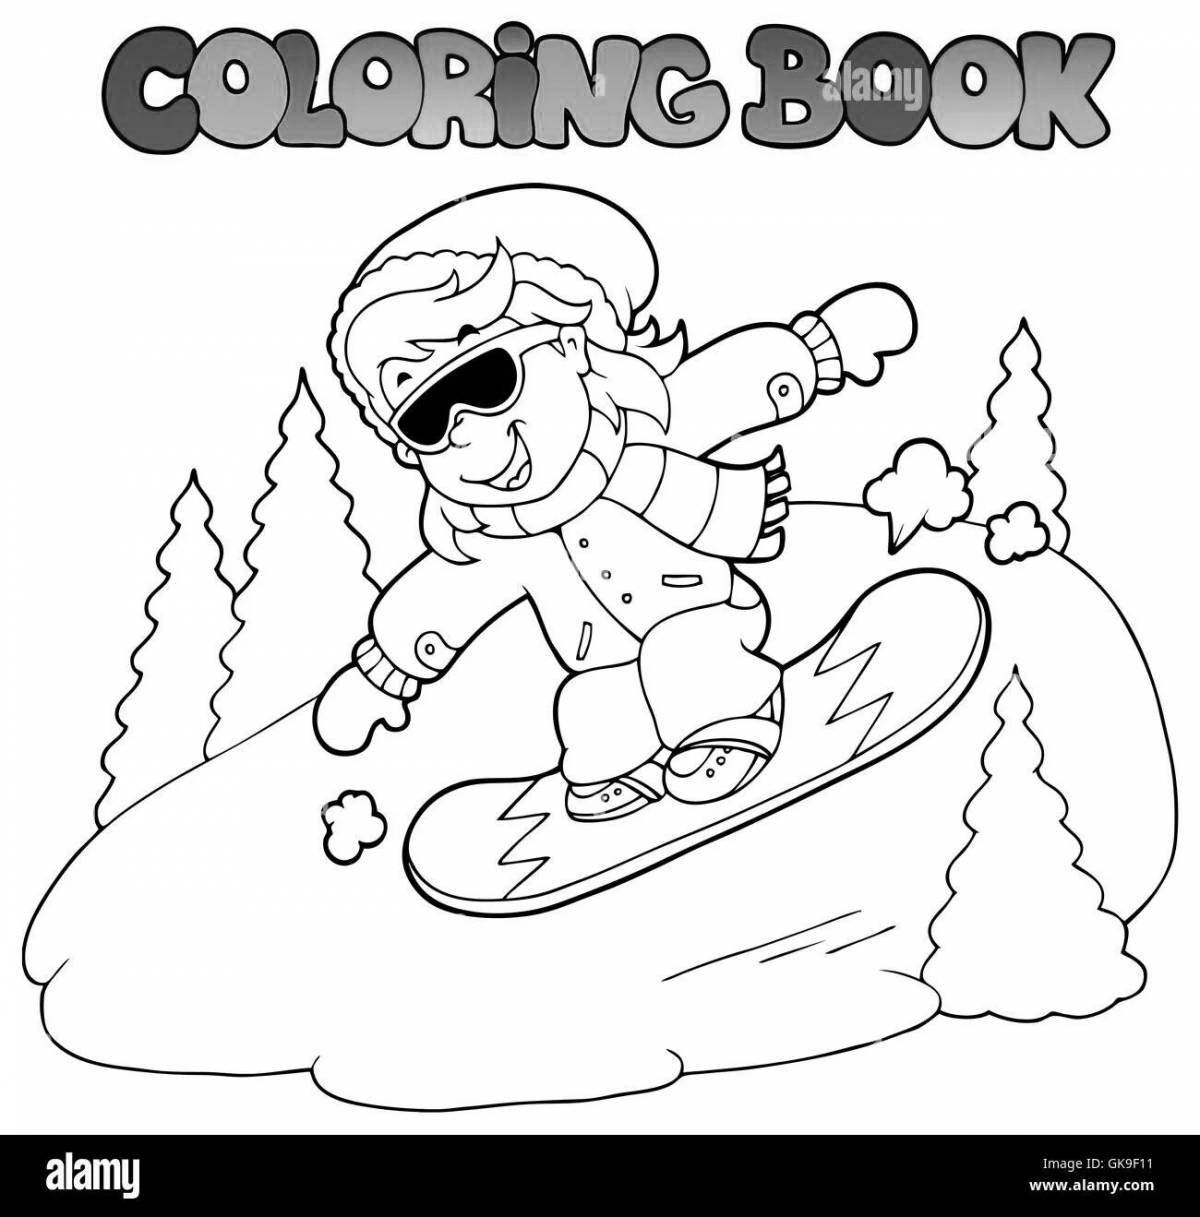 Adventure snowboard coloring book for kids